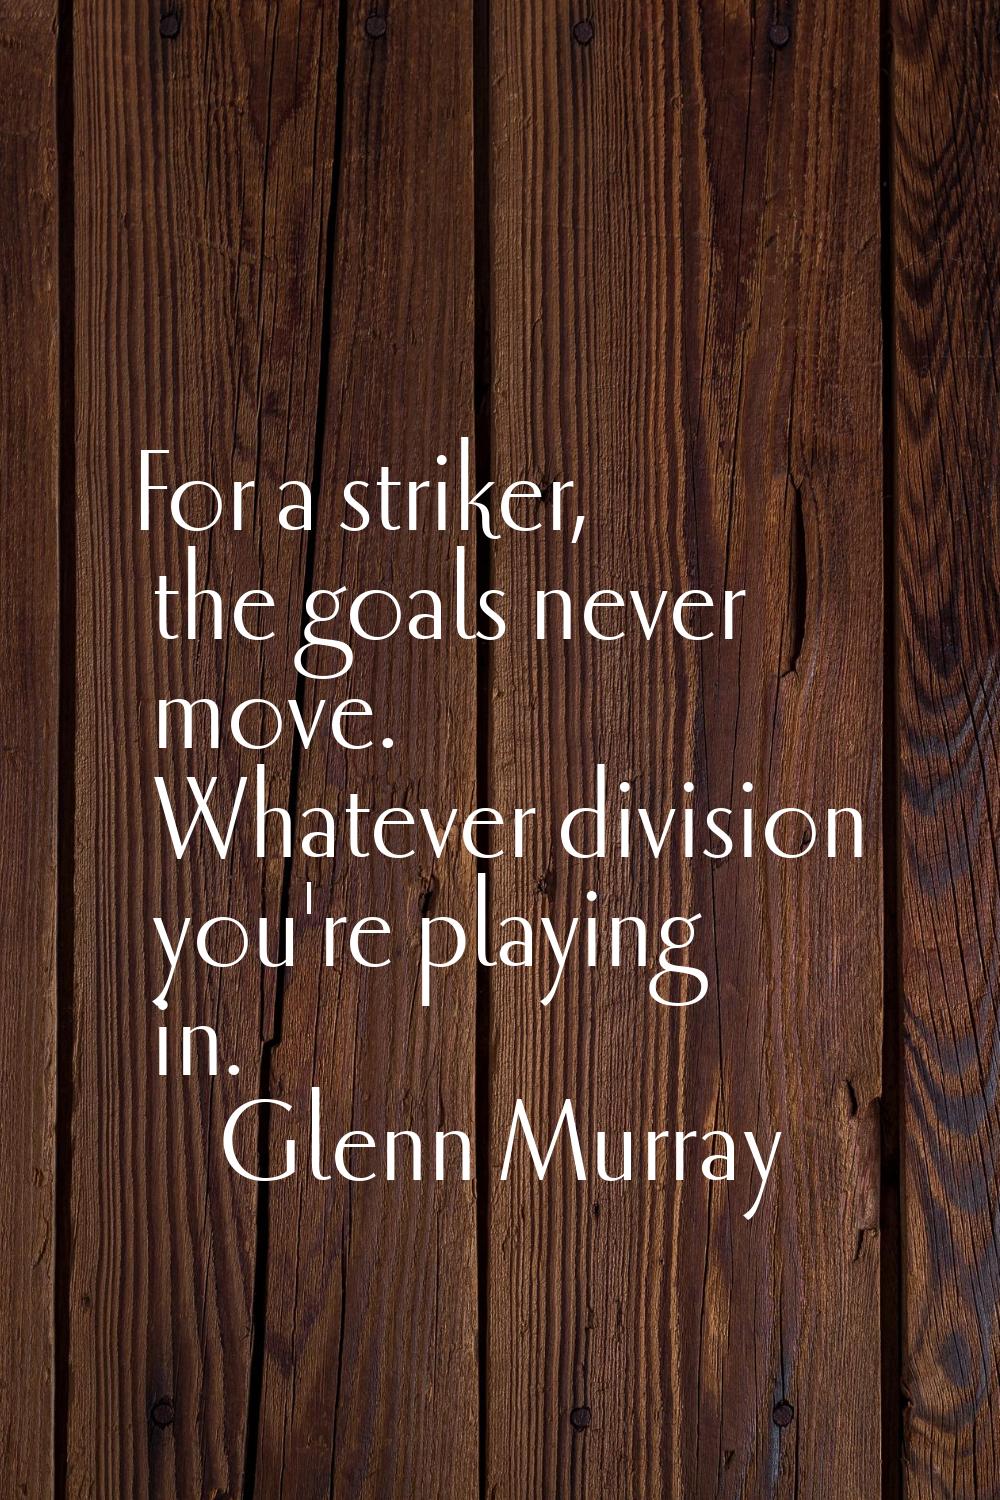 For a striker, the goals never move. Whatever division you're playing in.